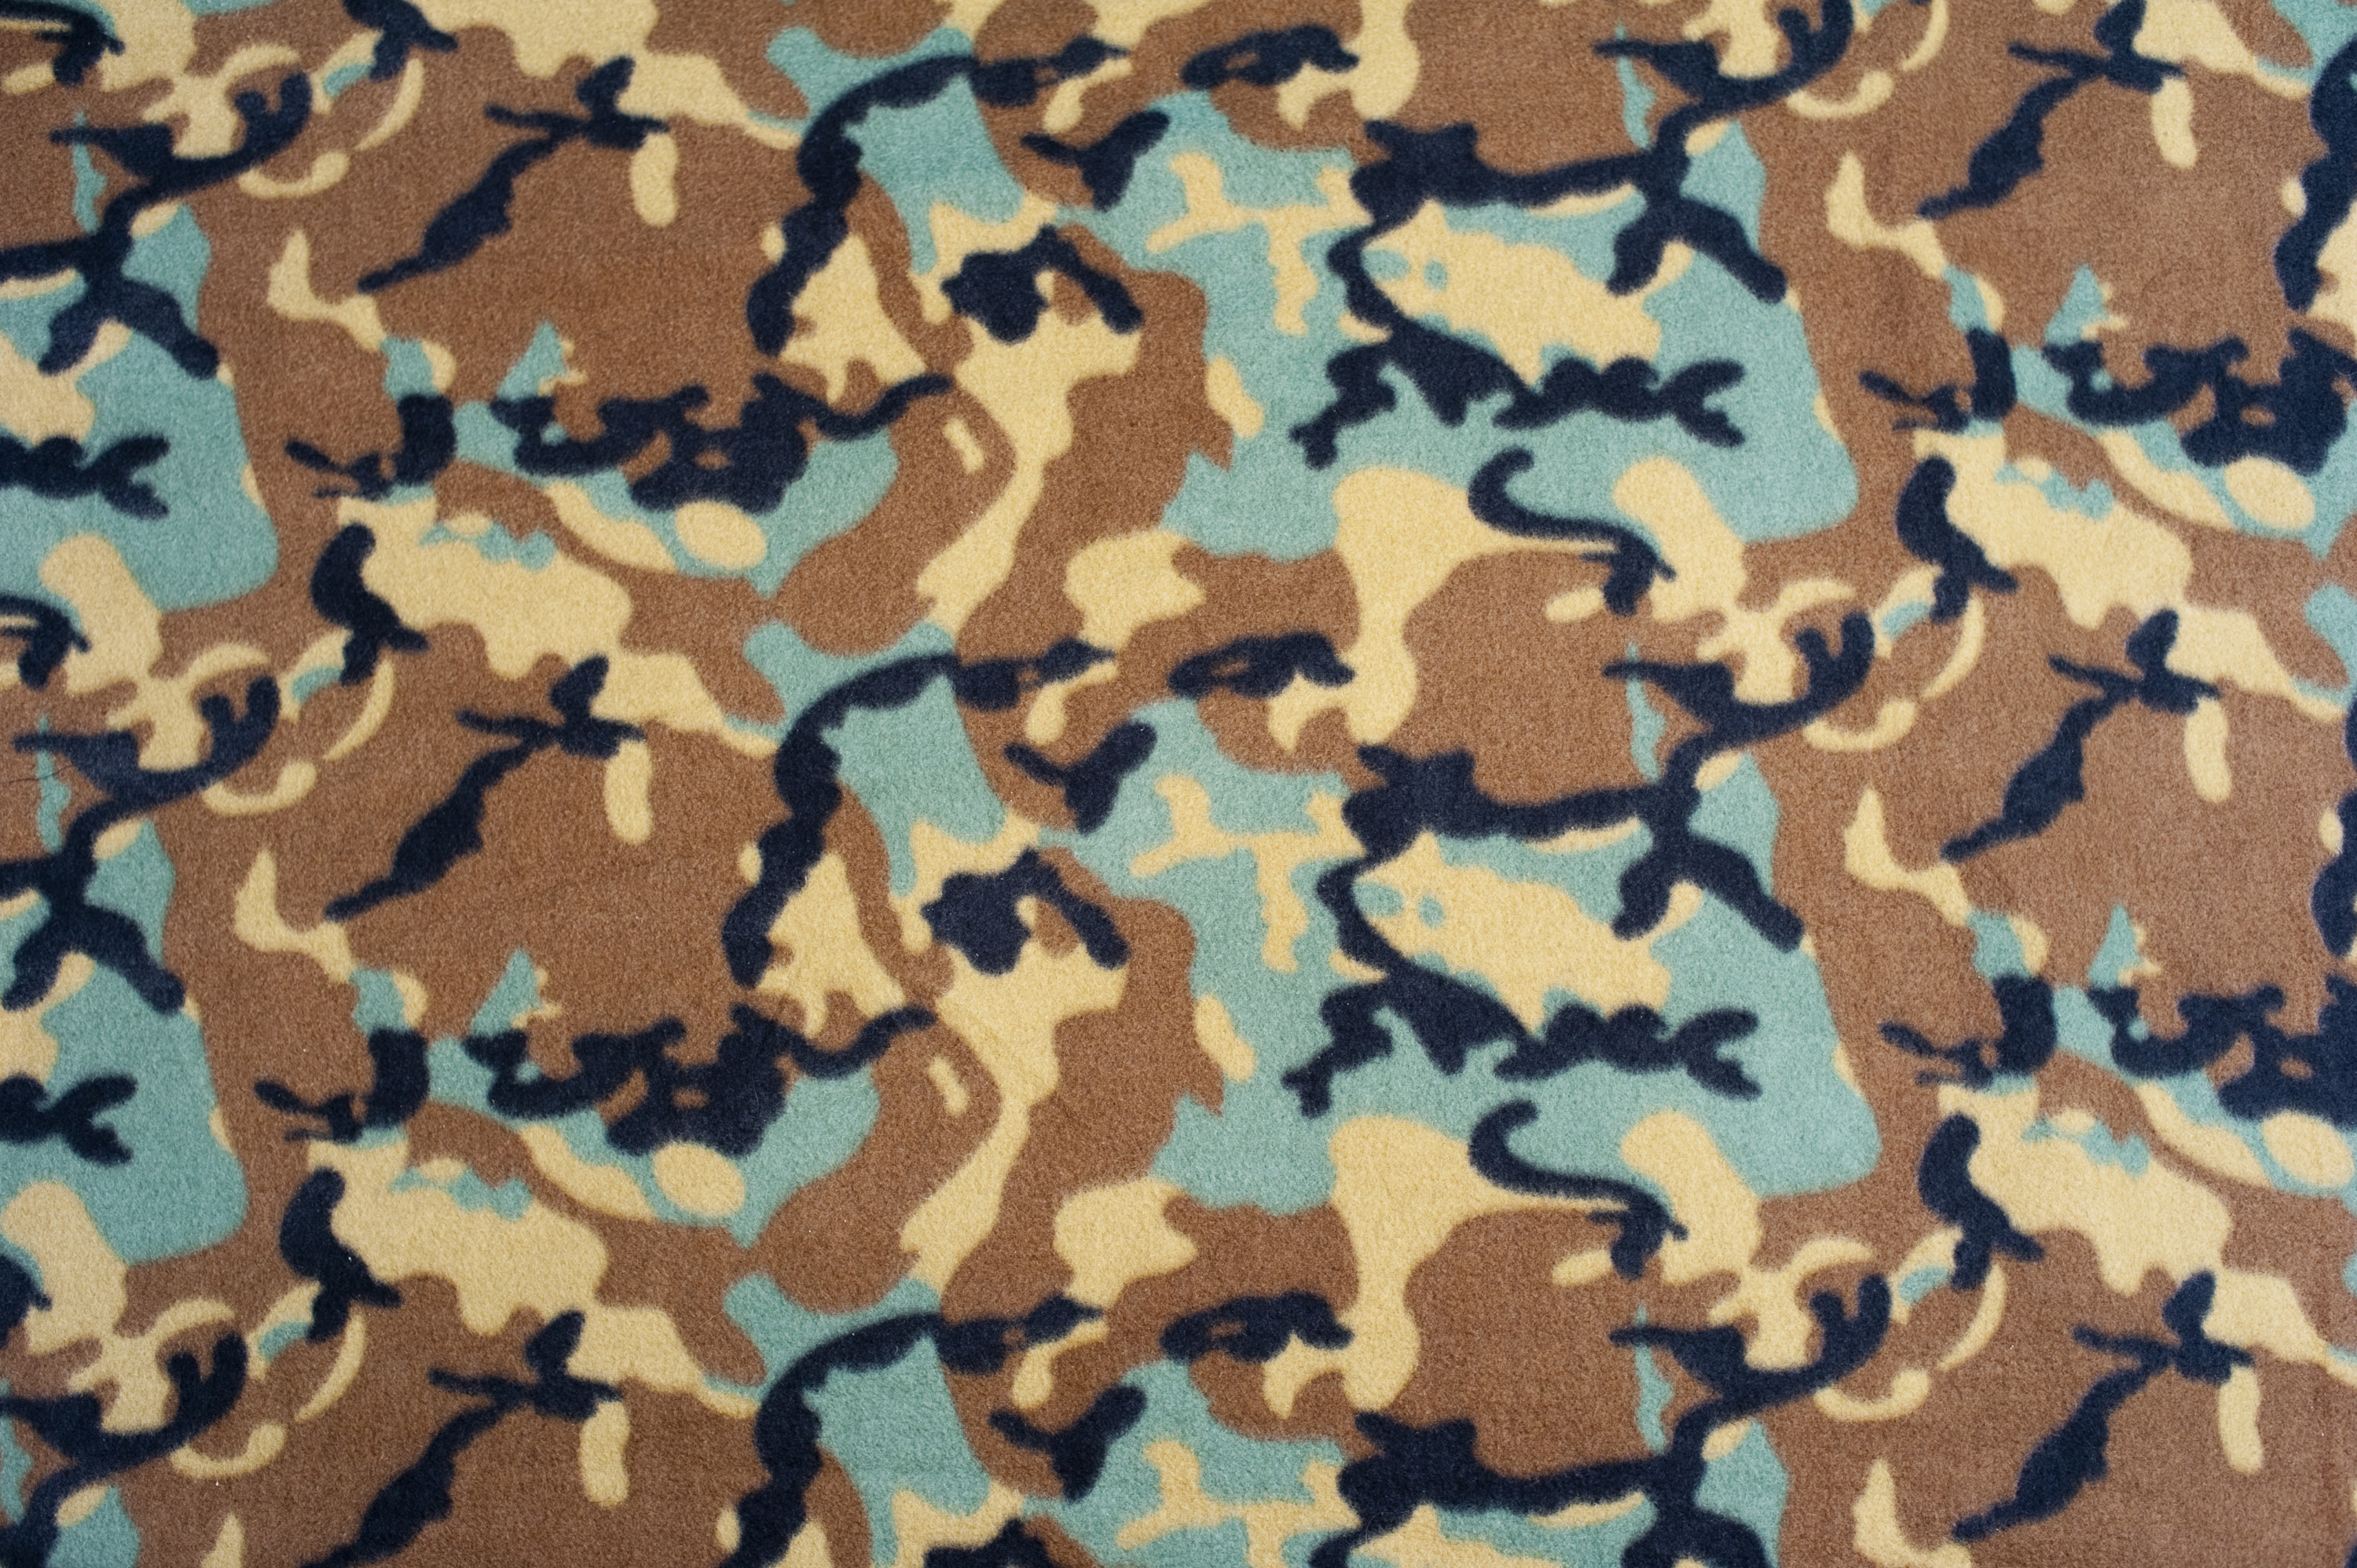 types of camouflage patterns